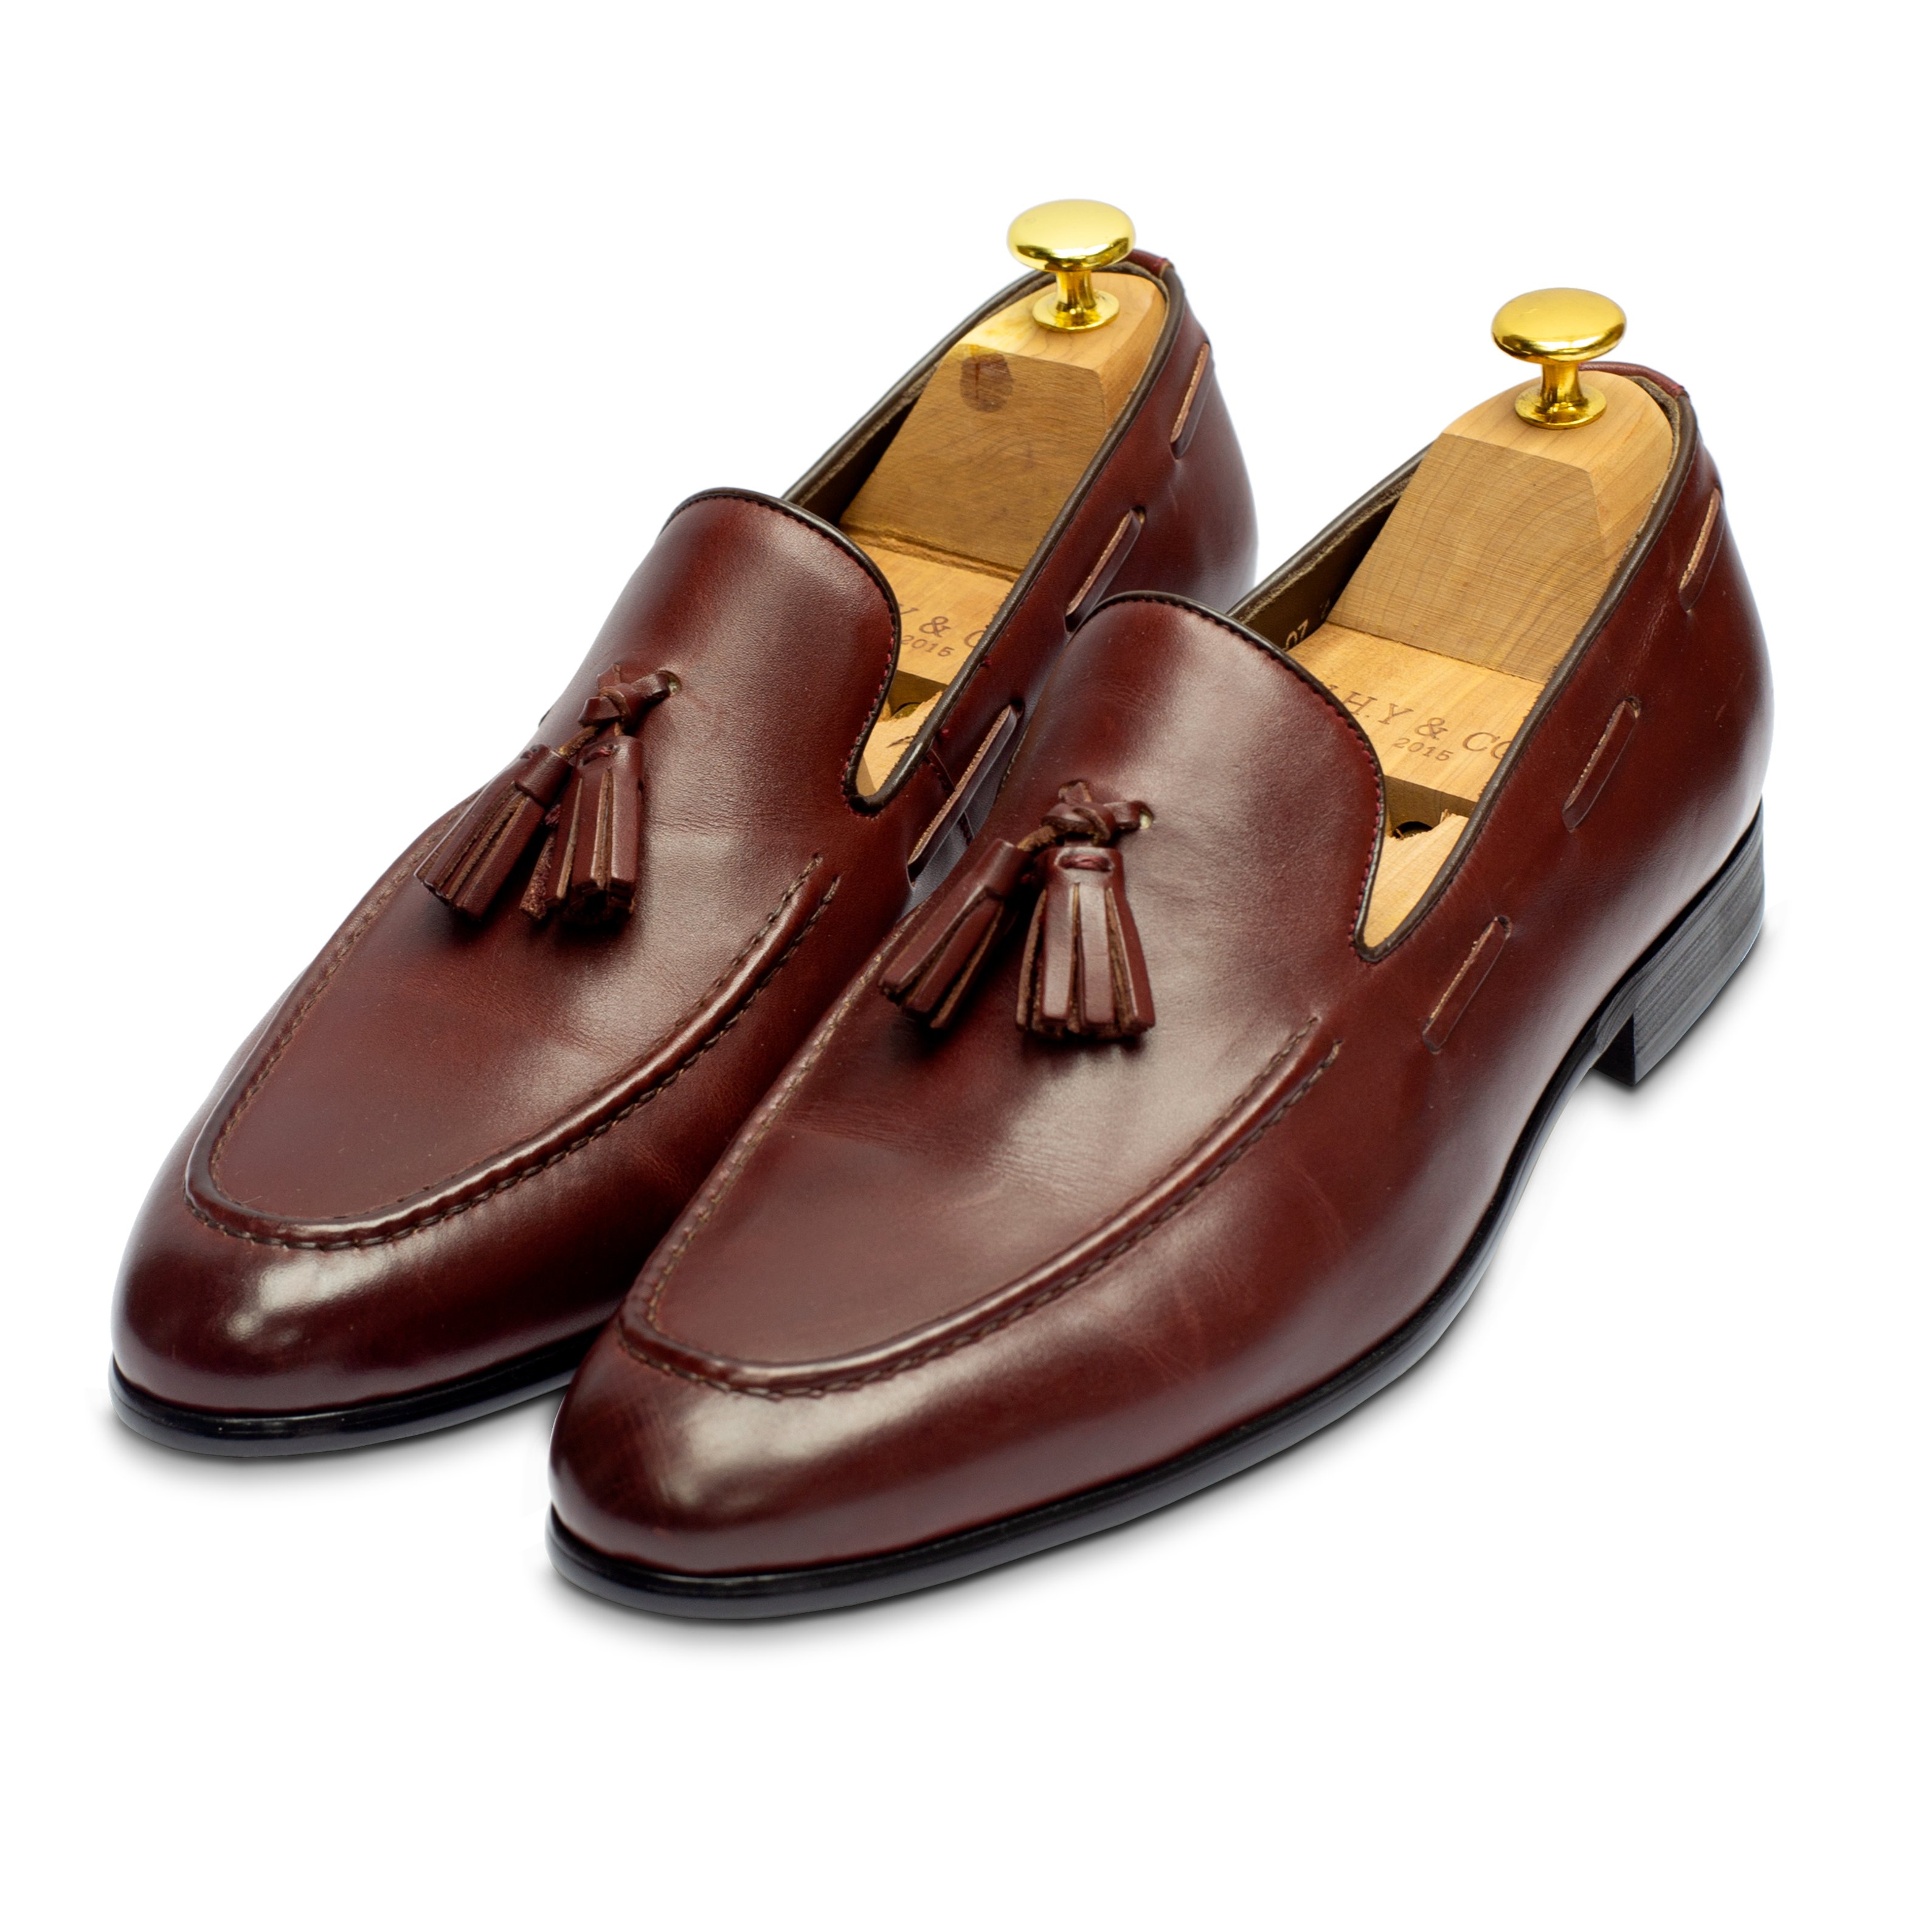 whyandco Tassel Loafers Burgundy